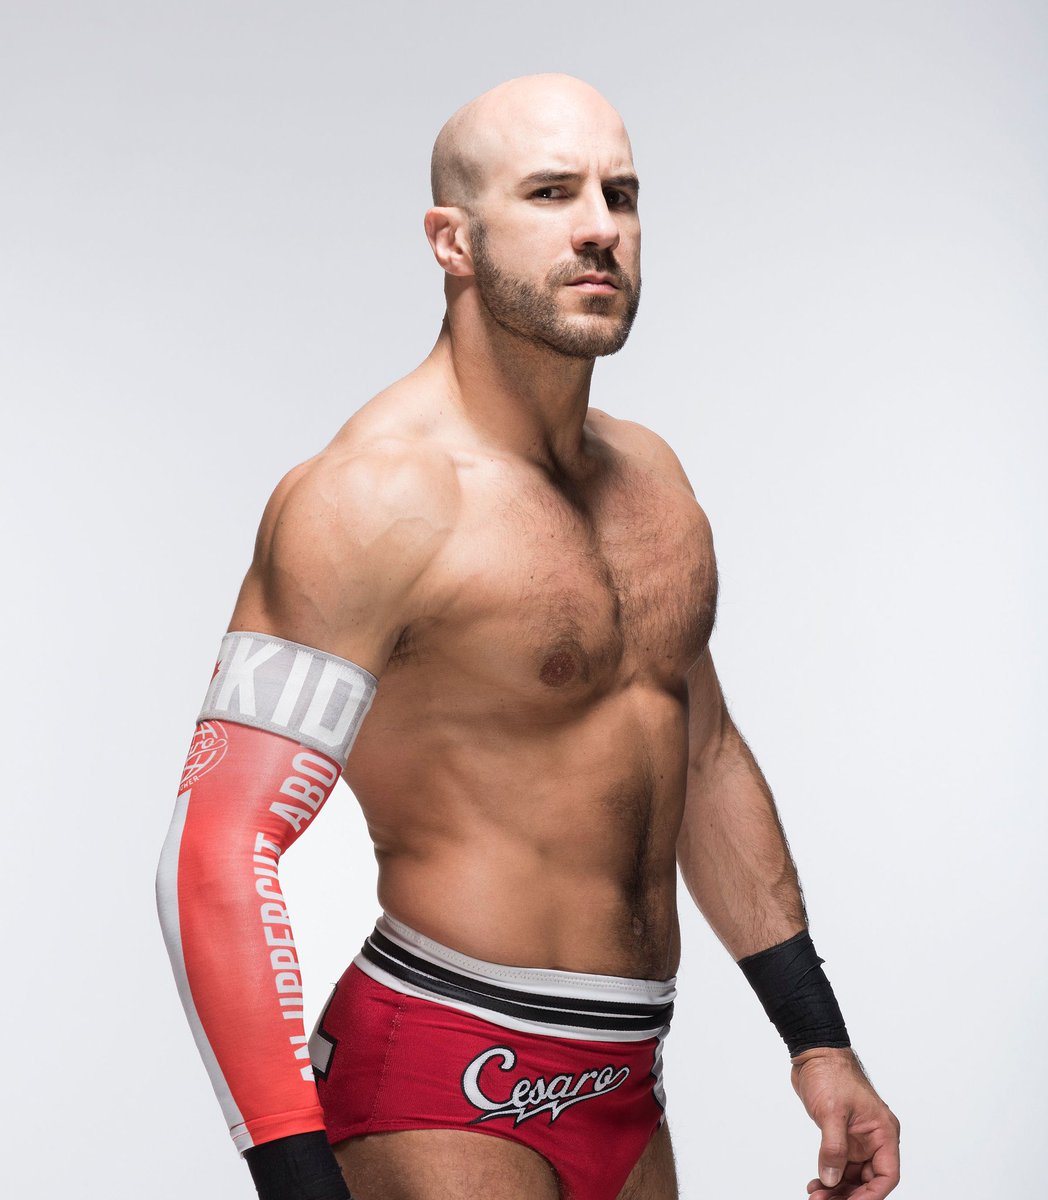 PWInsider have confirmed that Cesaro has left WWE.